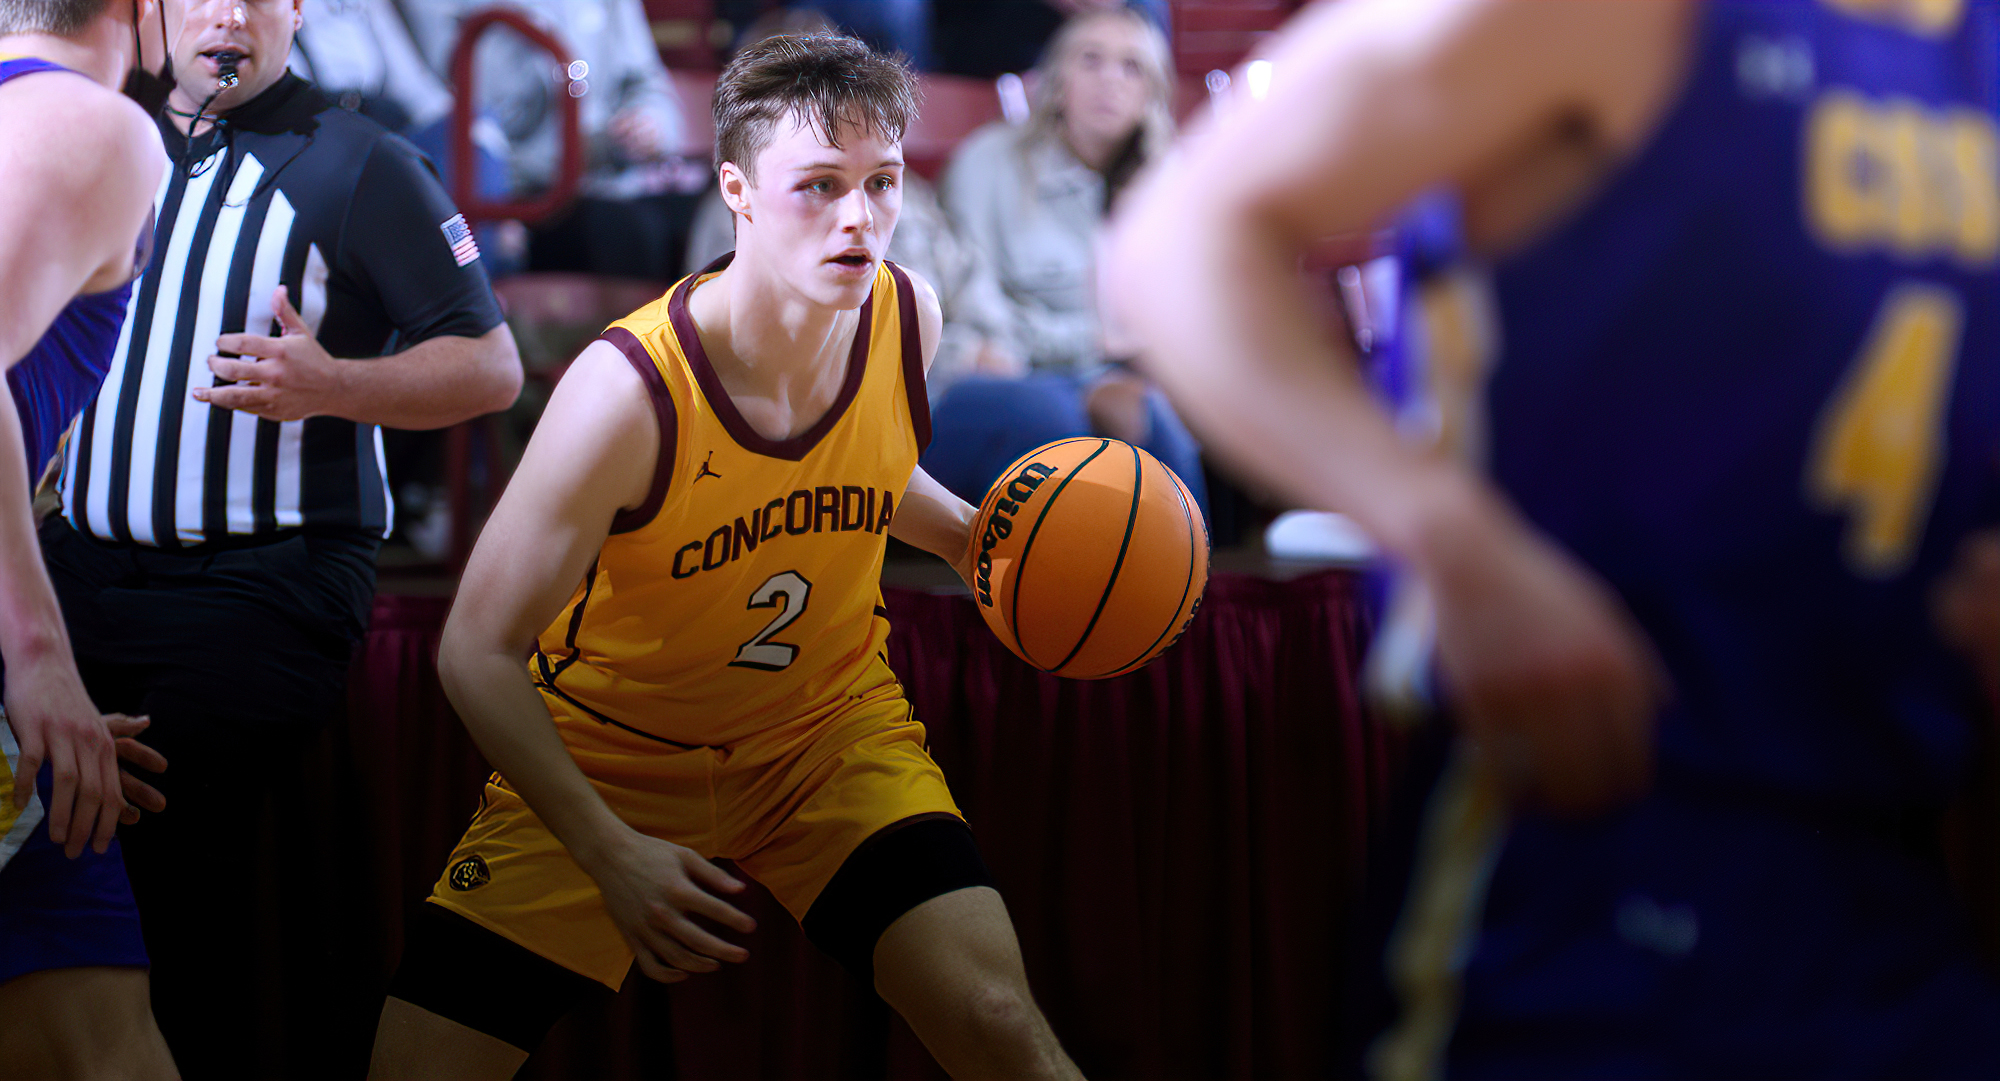 Senior Jackson Jangula went 9-for-14 from the field and 5-for-8 from outside the arc to finish with 24 points in the Cobbers' game at St. Scholastica.